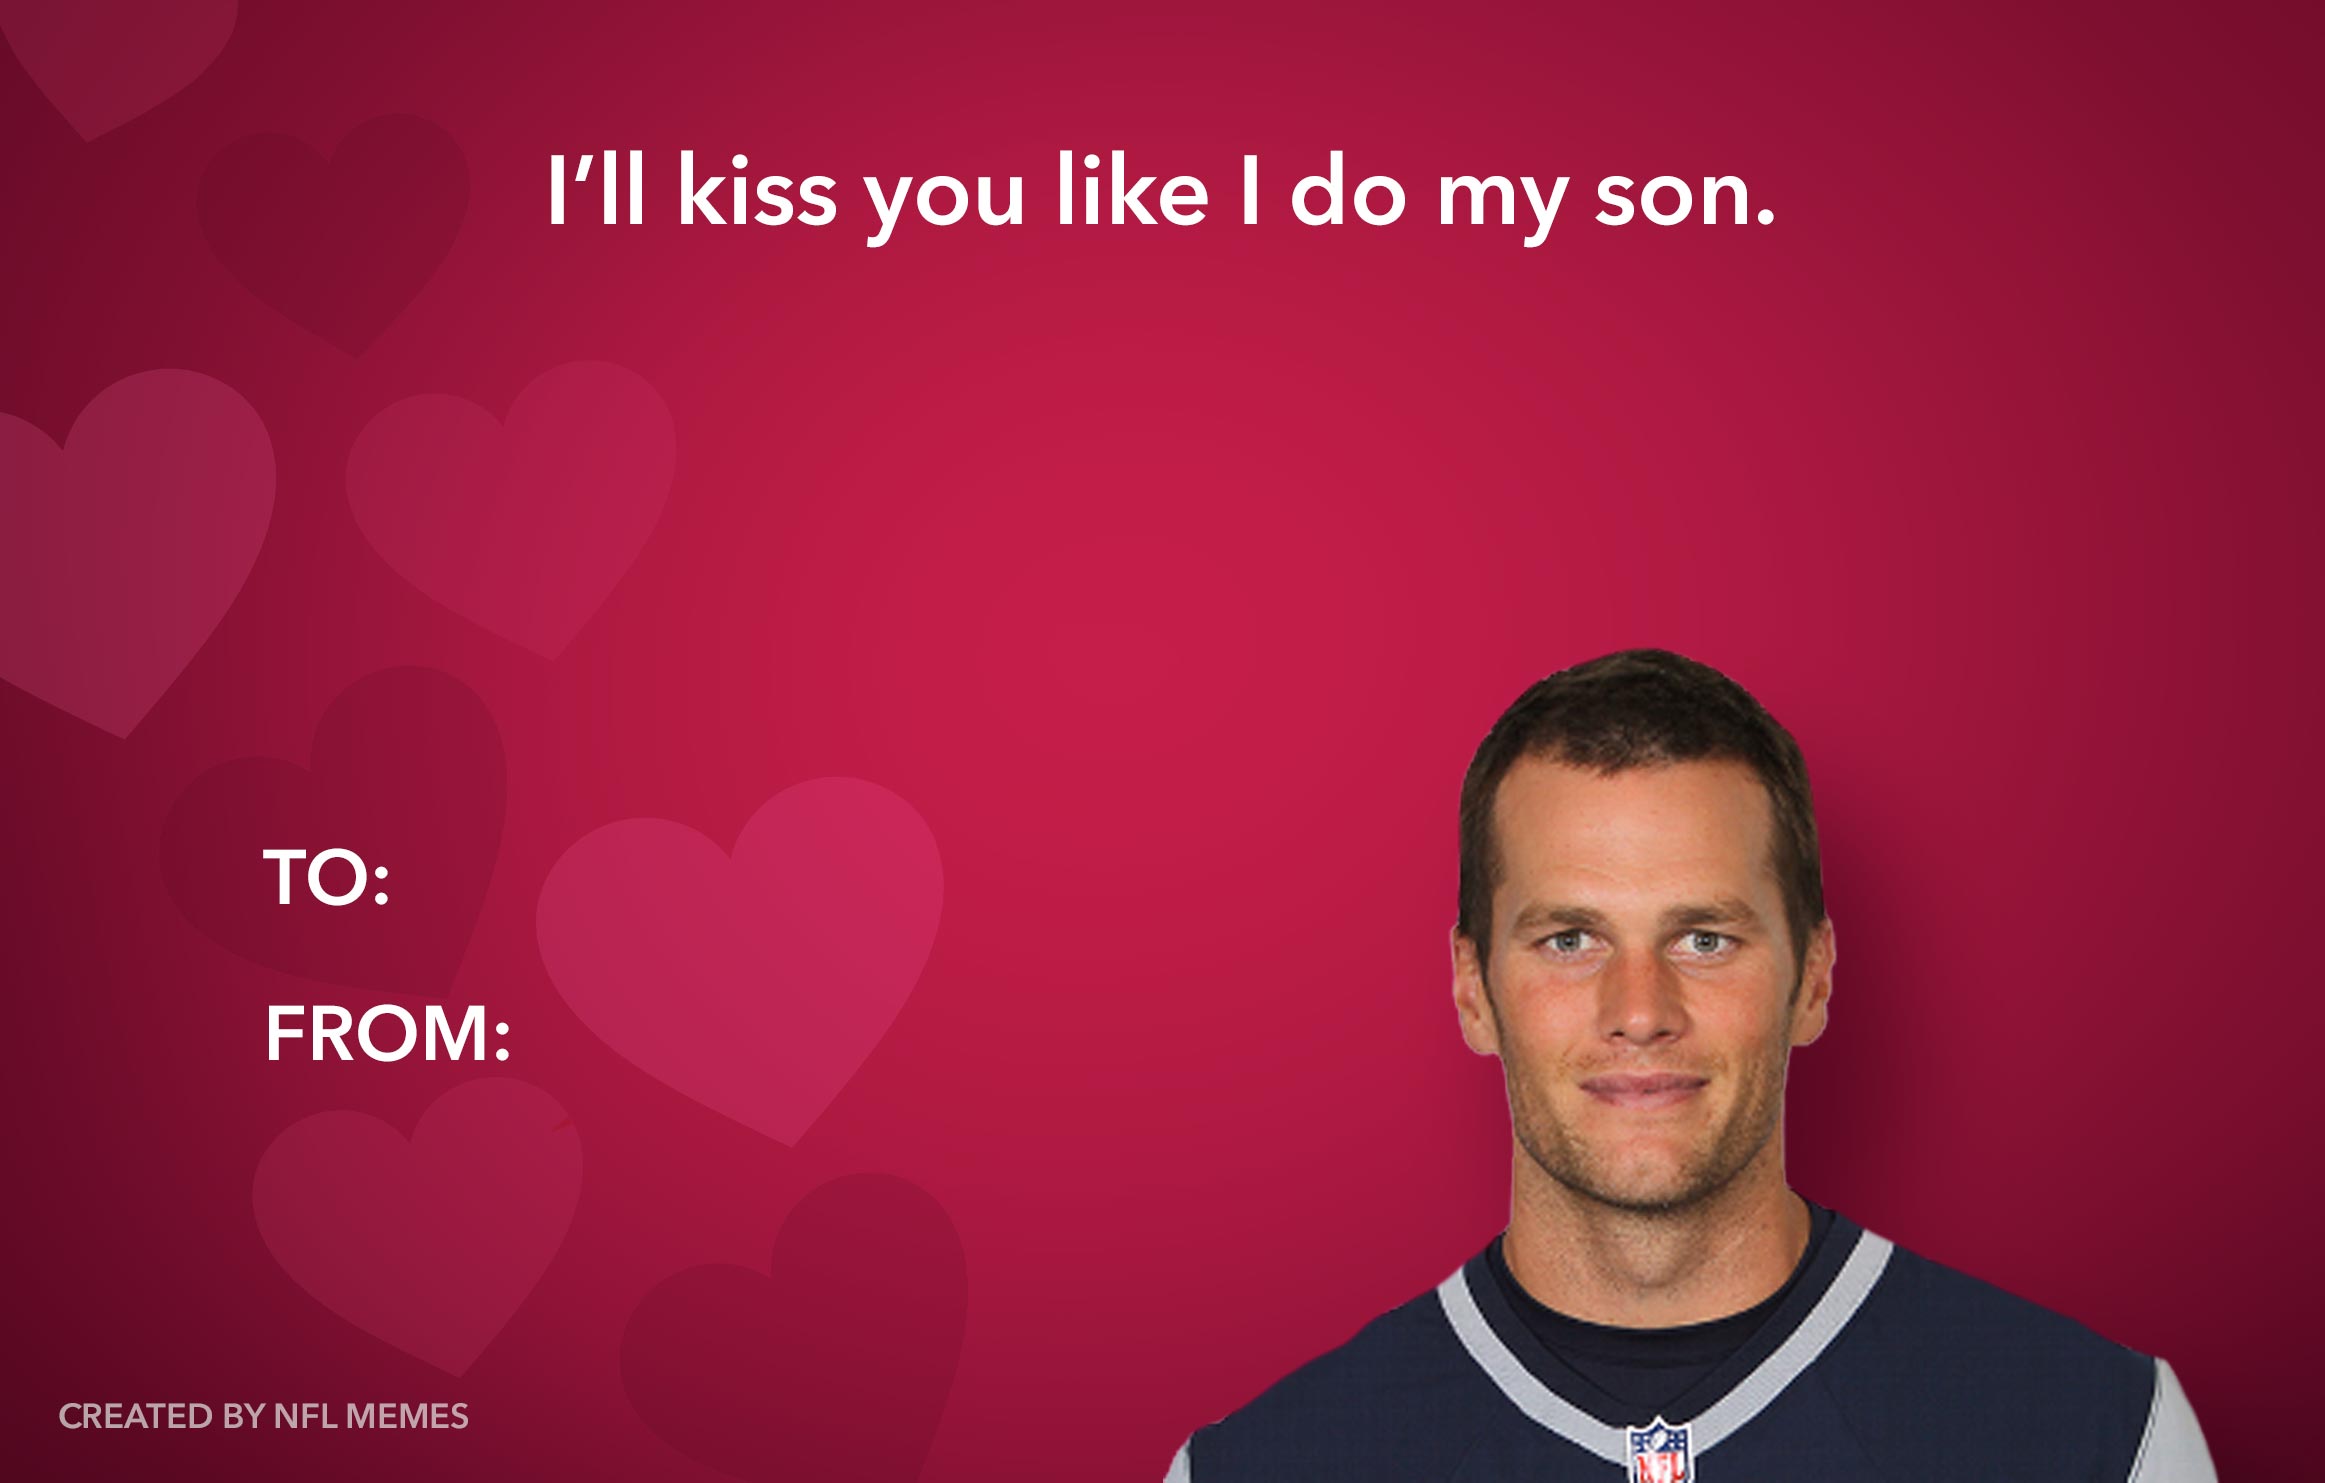 Here’s This Year’s Batch Of Hilarious NFL-Themed Valentine’s Day Cards (PICS)